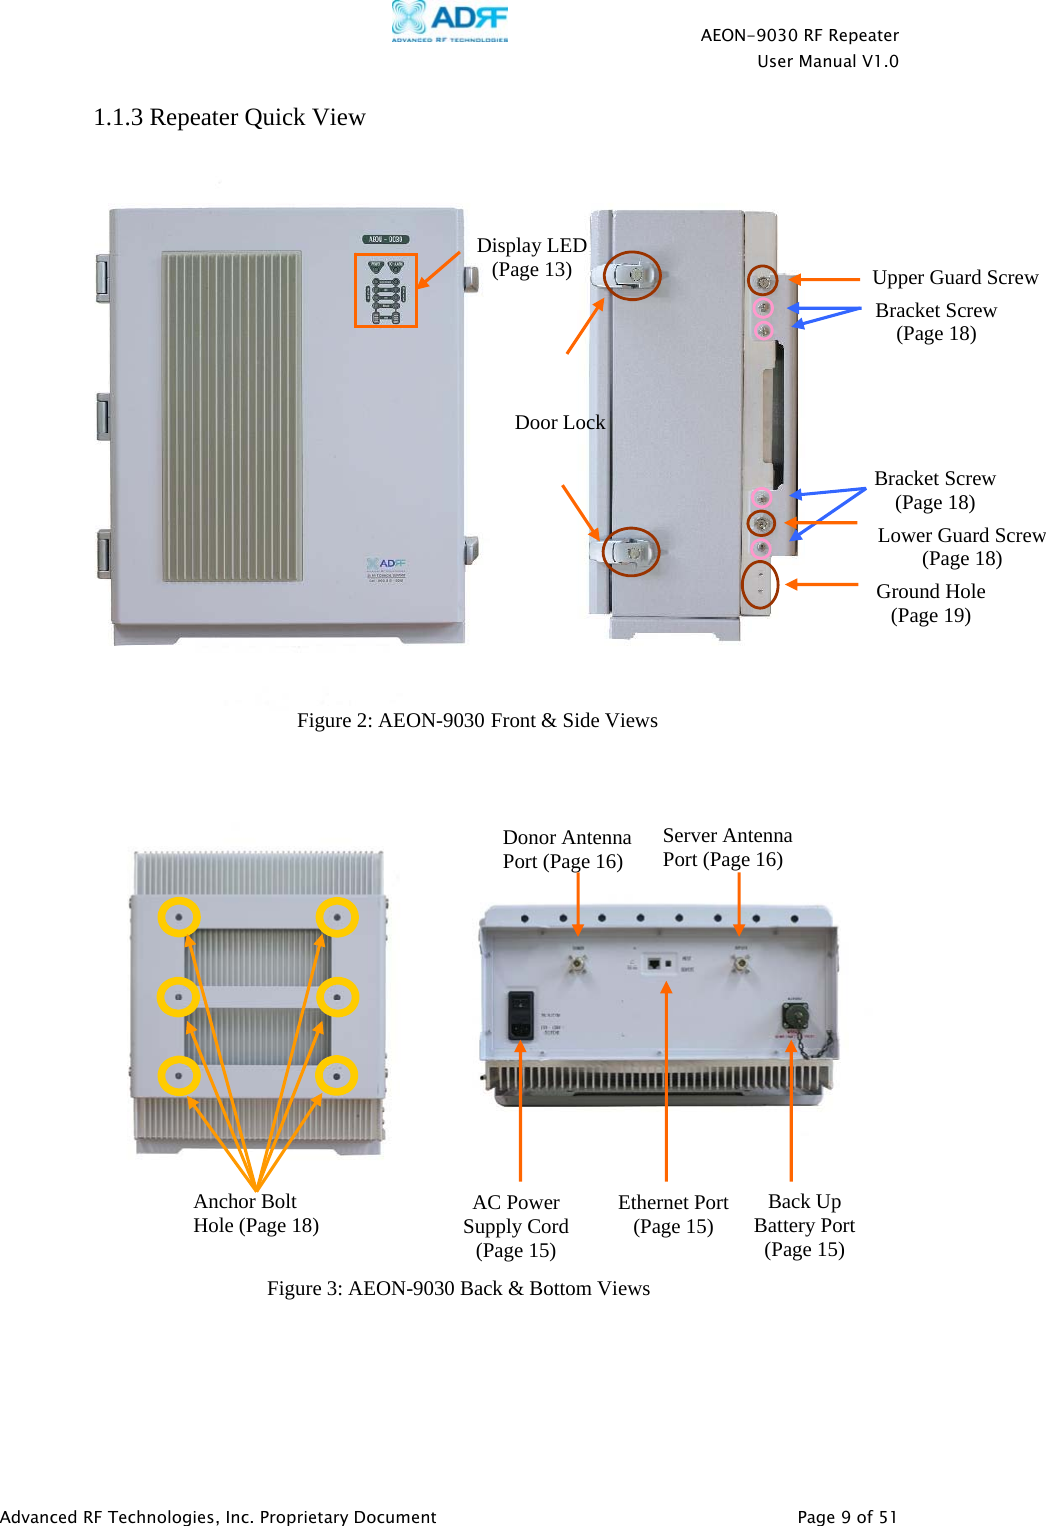    AEON-9030 RF Repeater  User Manual V1.0  Advanced RF Technologies, Inc. Proprietary Document   Page 9 of 51  1.1.3 Repeater Quick View         Upper Guard ScrewGround Hole (Page 19) Figure 2: AEON-9030 Front &amp; Side Views Figure 3: AEON-9030 Back&amp; BottomViewsDoor Lock Lower Guard Screw (Page 18) Bracket Screw (Page 18) Bracket Screw (Page 18) Anchor Bolt Hole (Page 18) Donor Antenna Port (Page 16) Server Antenna Port (Page 16) Ethernet Port (Page 15)  Back Up Battery Port (Page 15) AC Power Supply Cord(Page 15) Display LED(Page 13) 